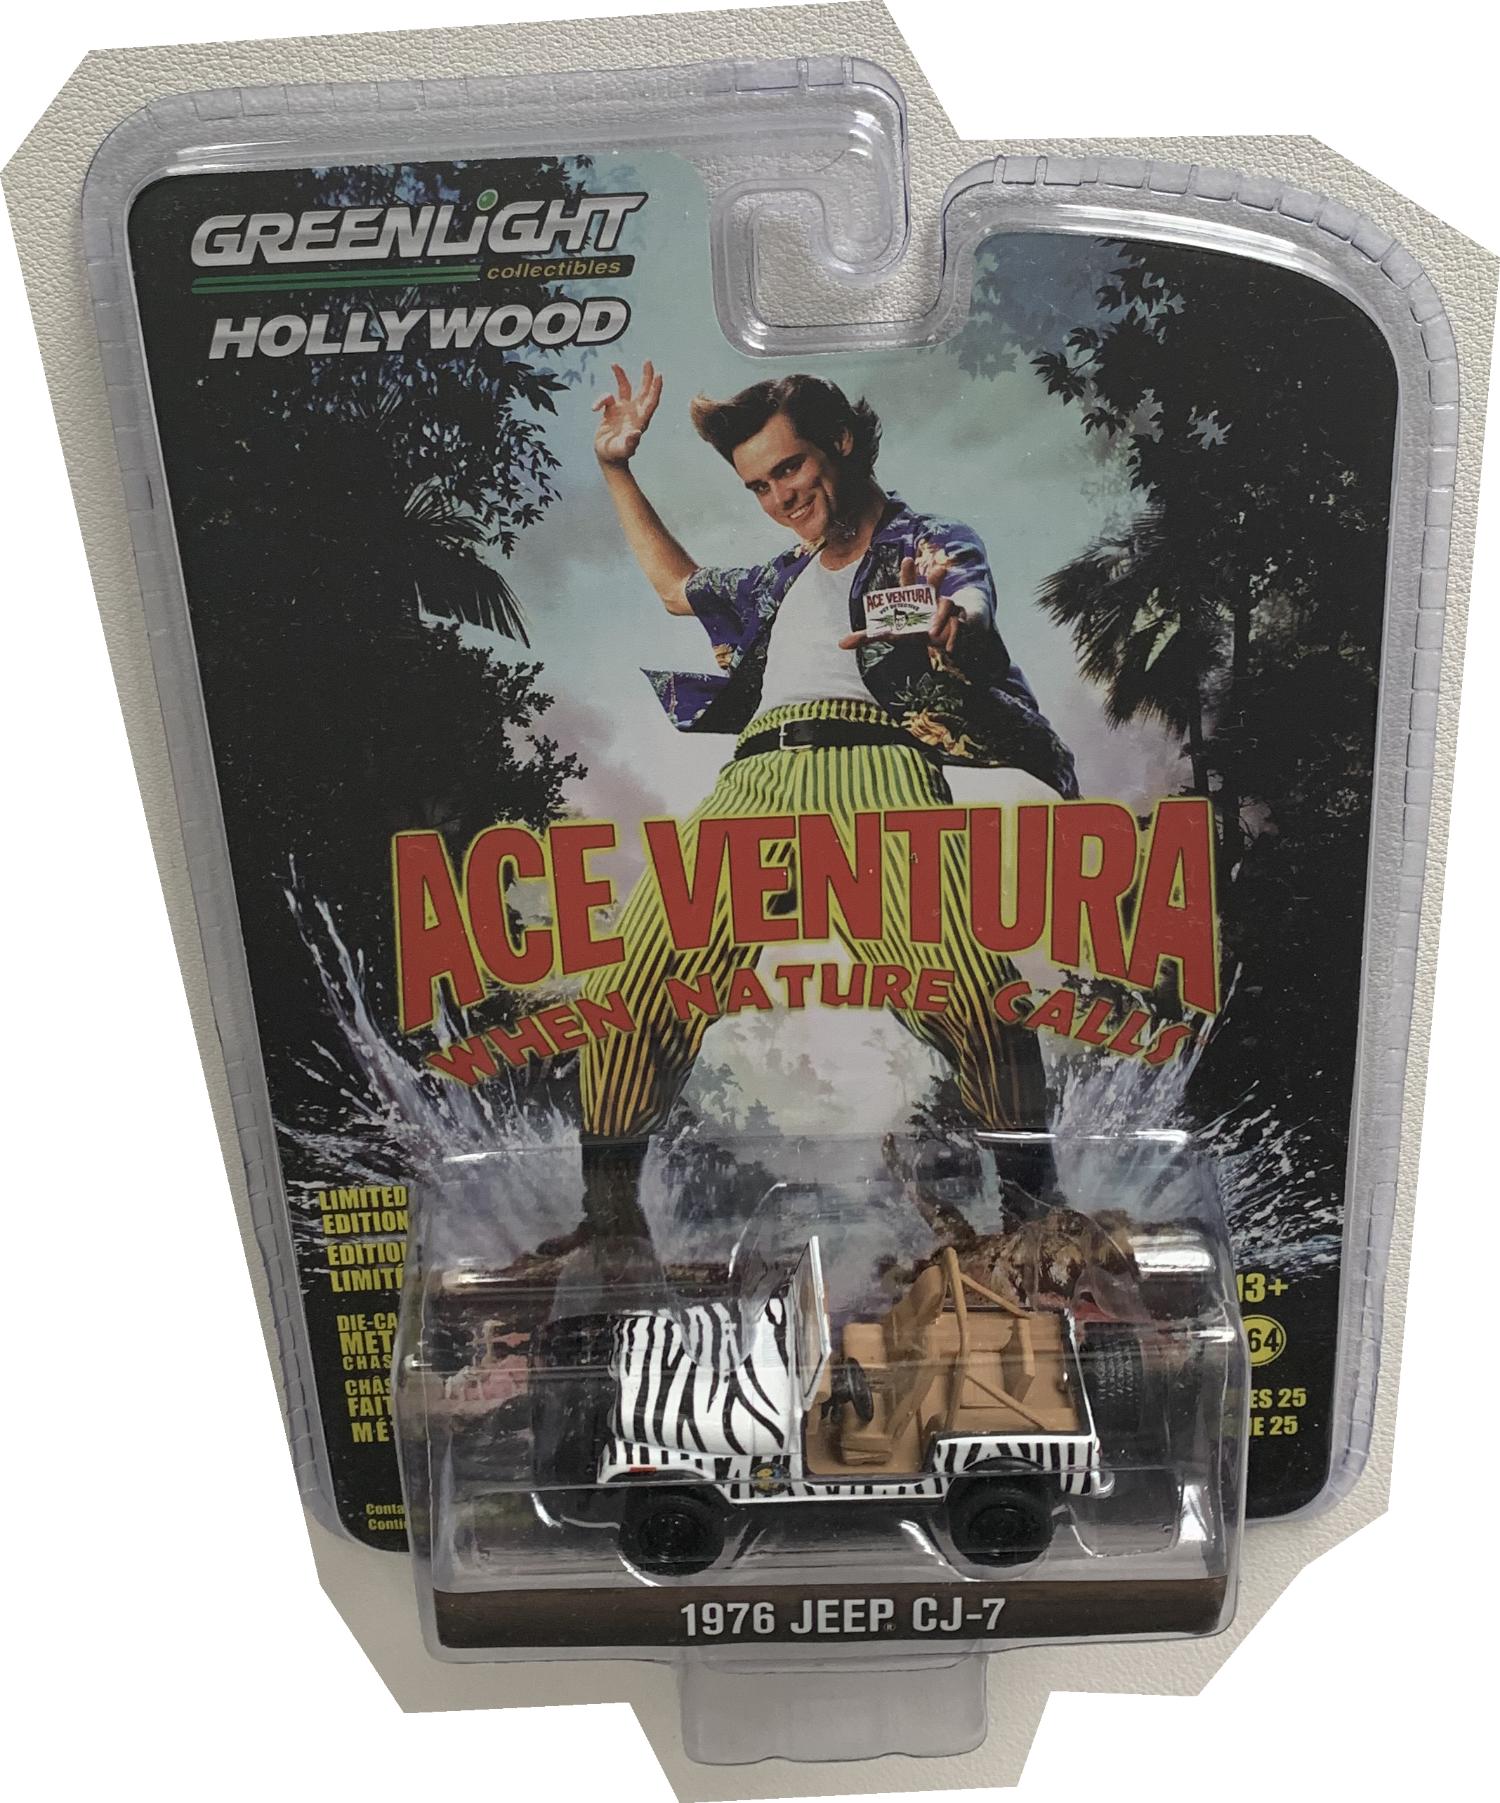 Ace Ventura ' when nature calls'  1976 Jeep CJ-7 in white / black 1:64 scale model from Greenlight, limited edition